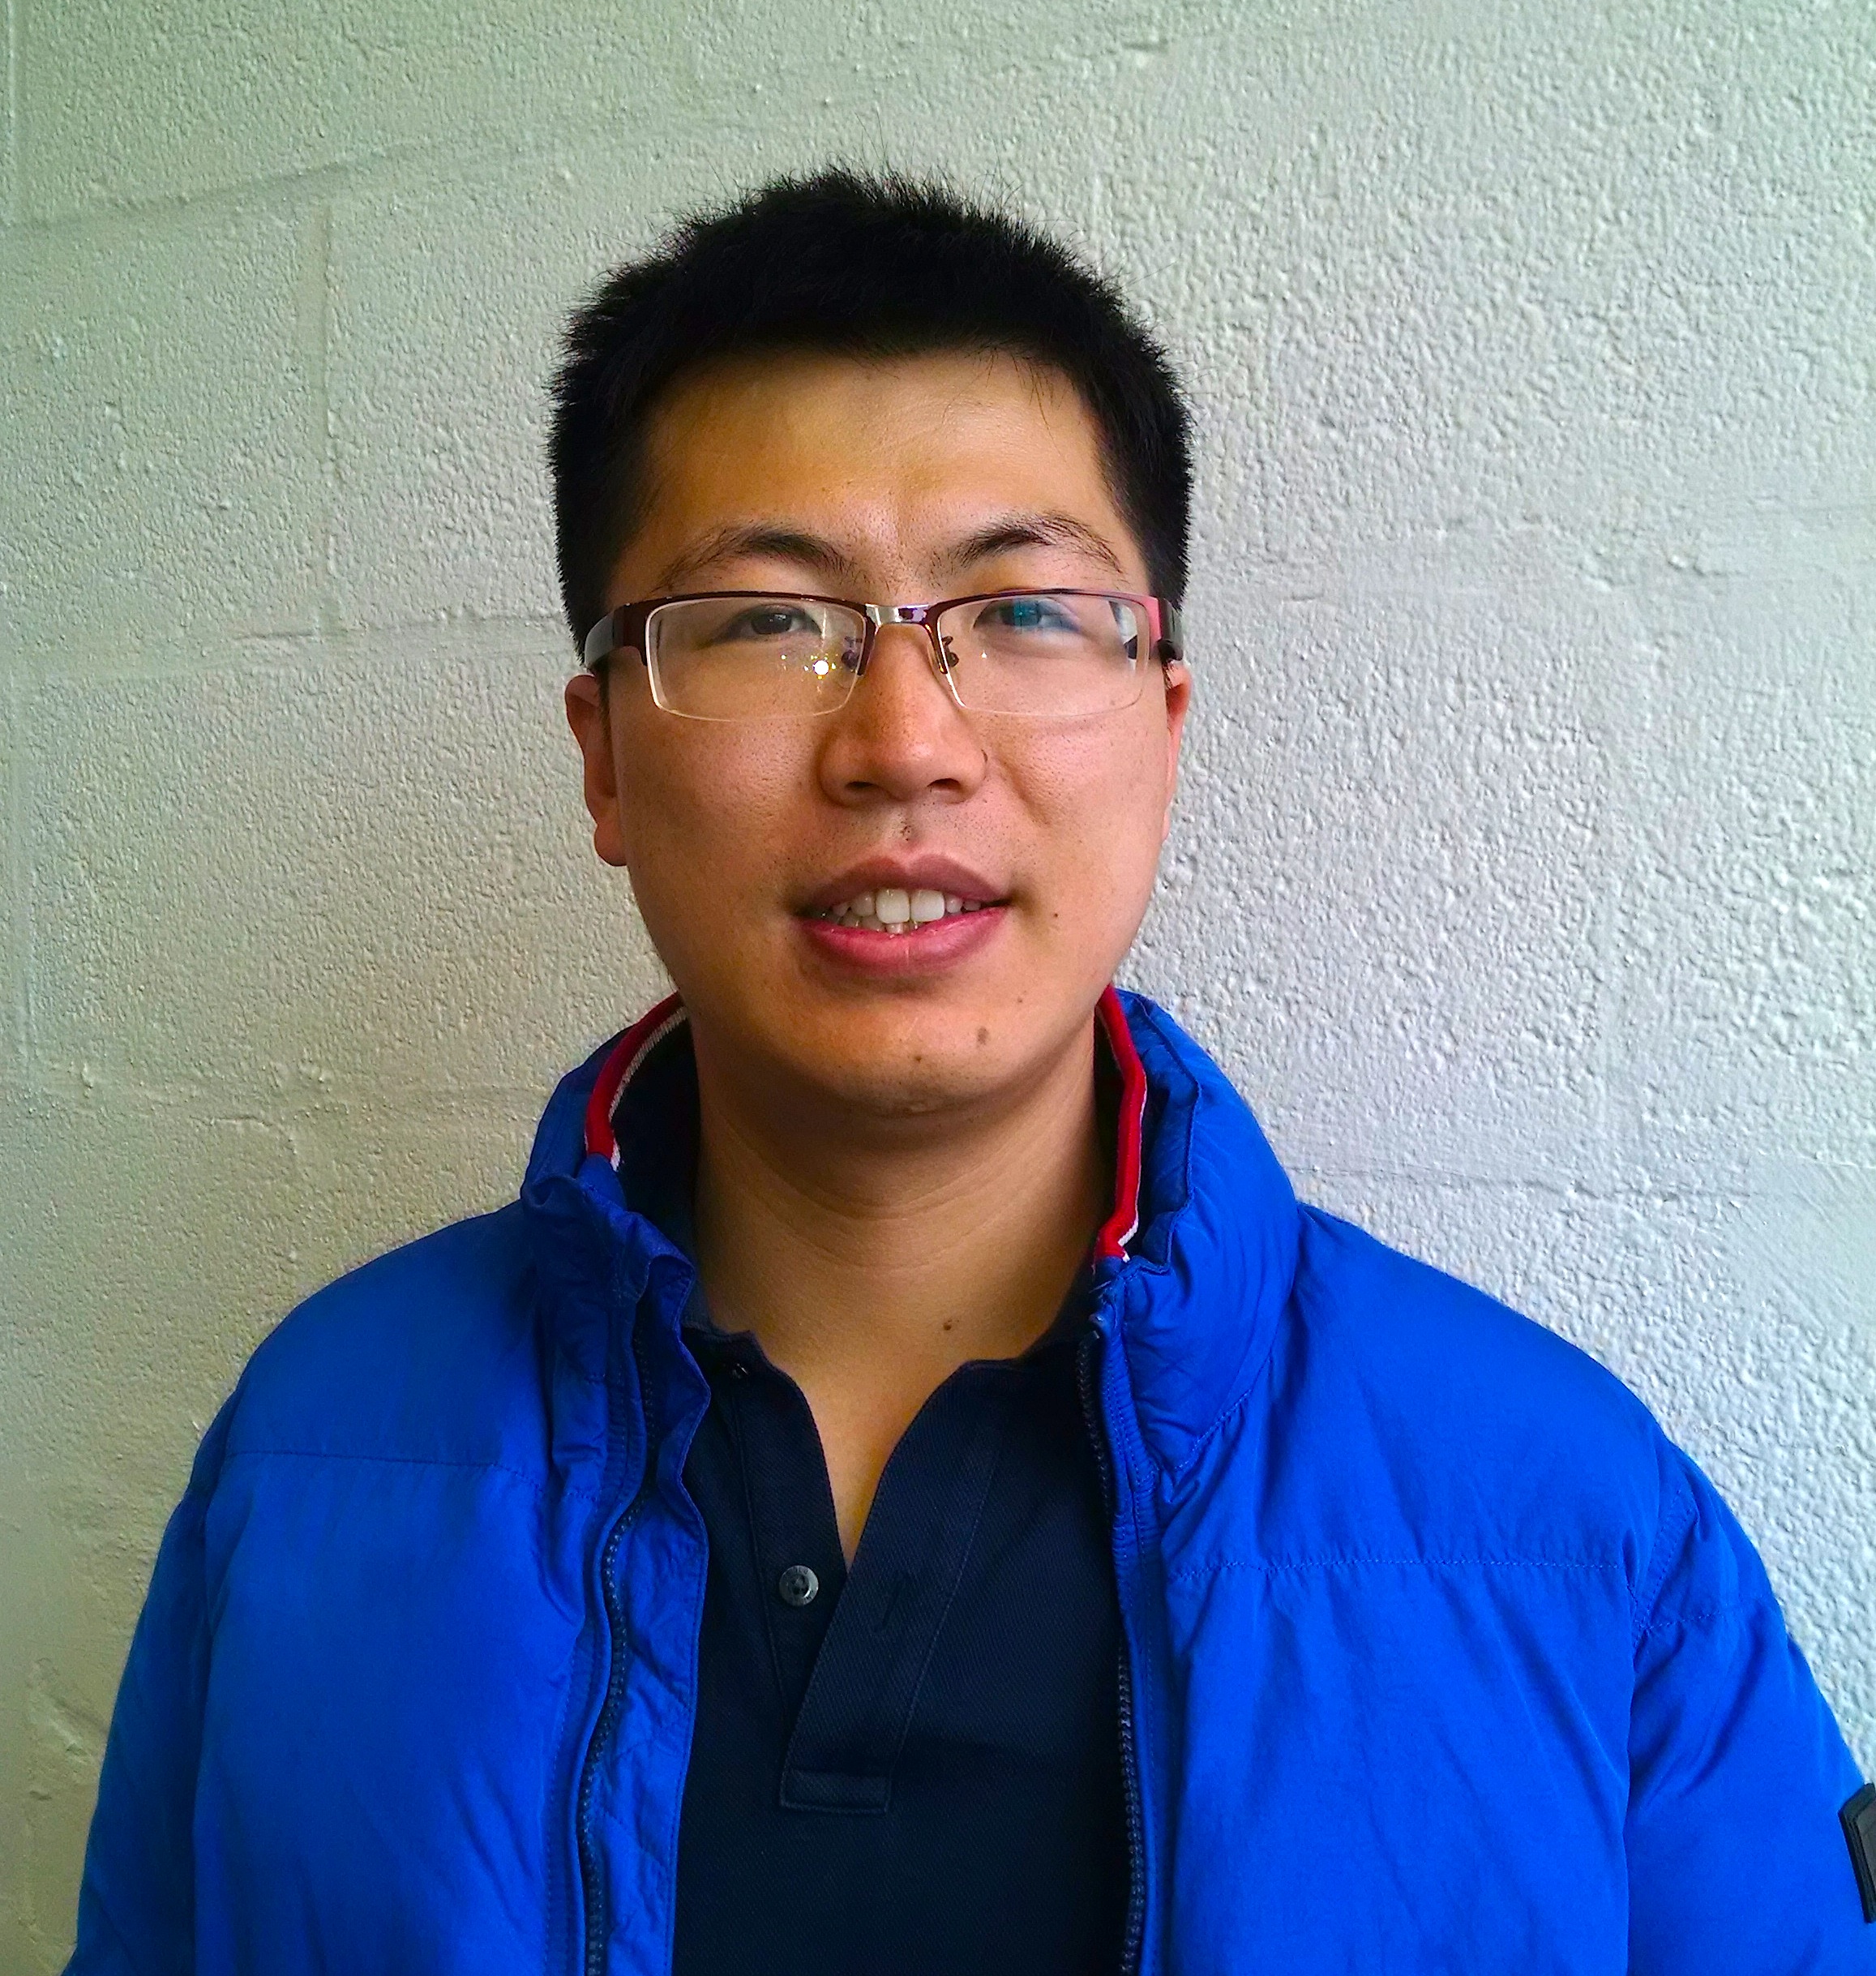 Image: First author and Chem/Bio PhD Candidate, Tao Gao.